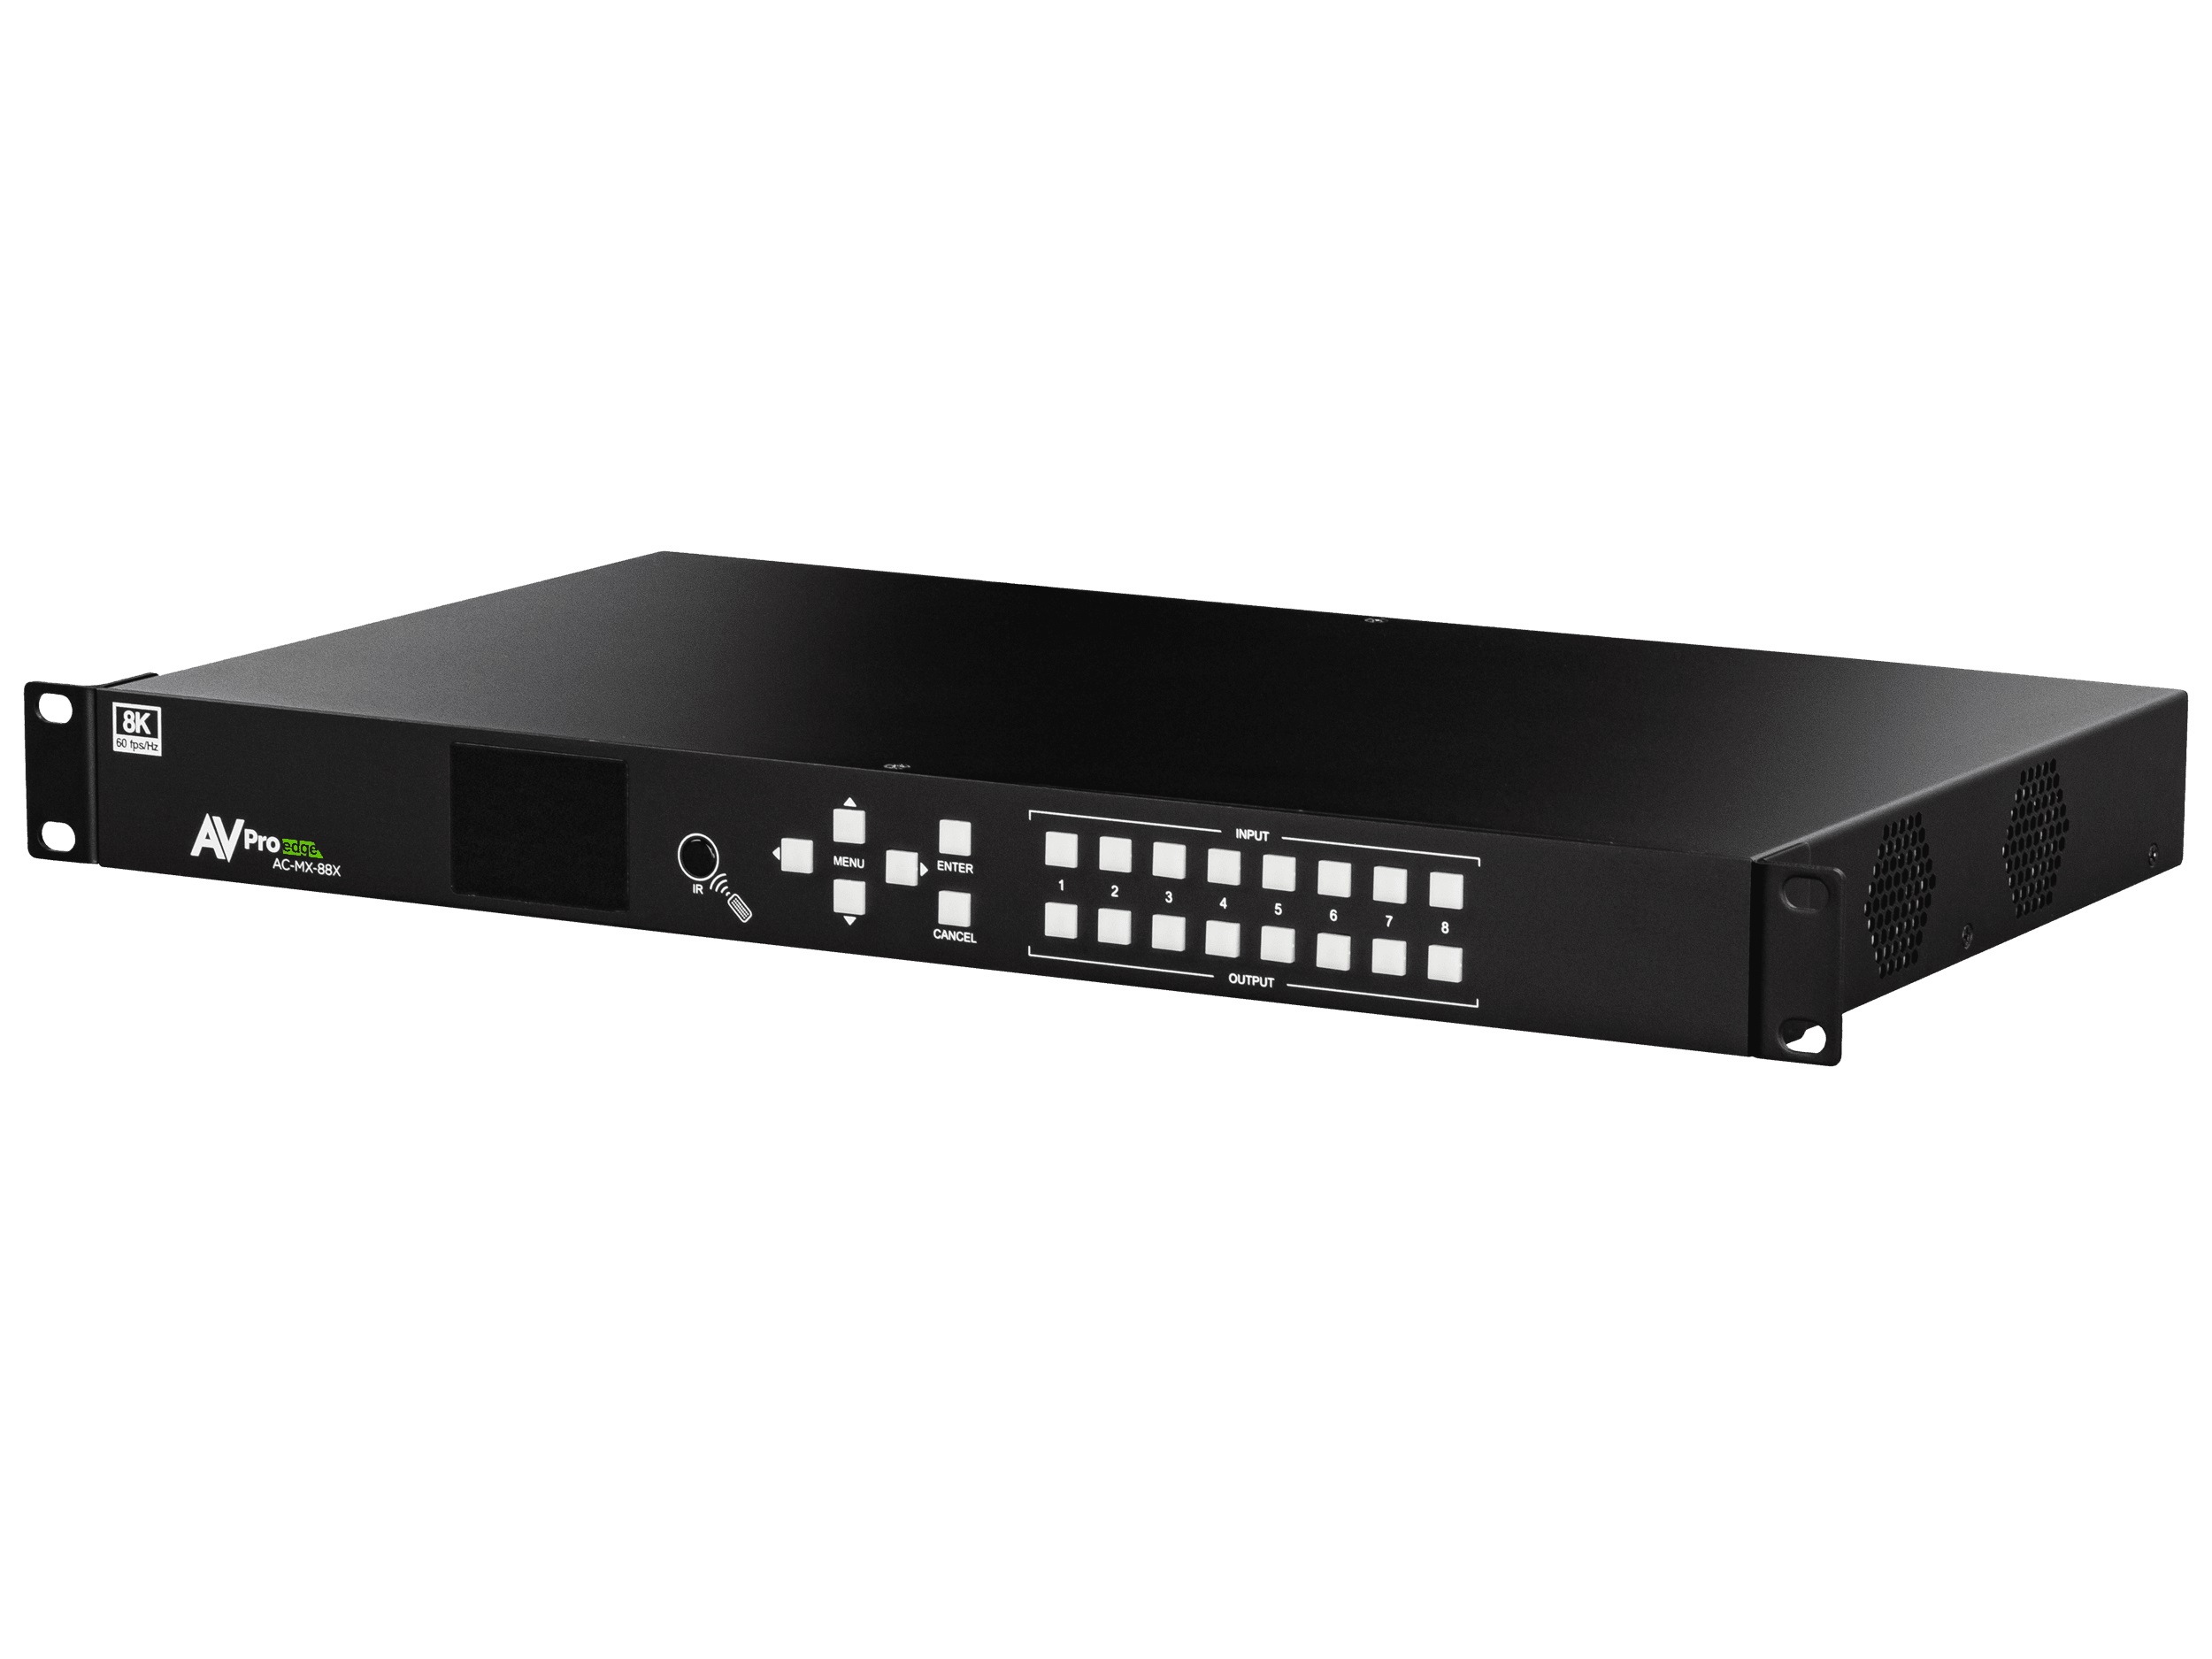 AC-MX-88X 8K 8x8 Matrix with Ultrawide/40Gbps Bandwidth Input and Output Stages by AVPro Edge